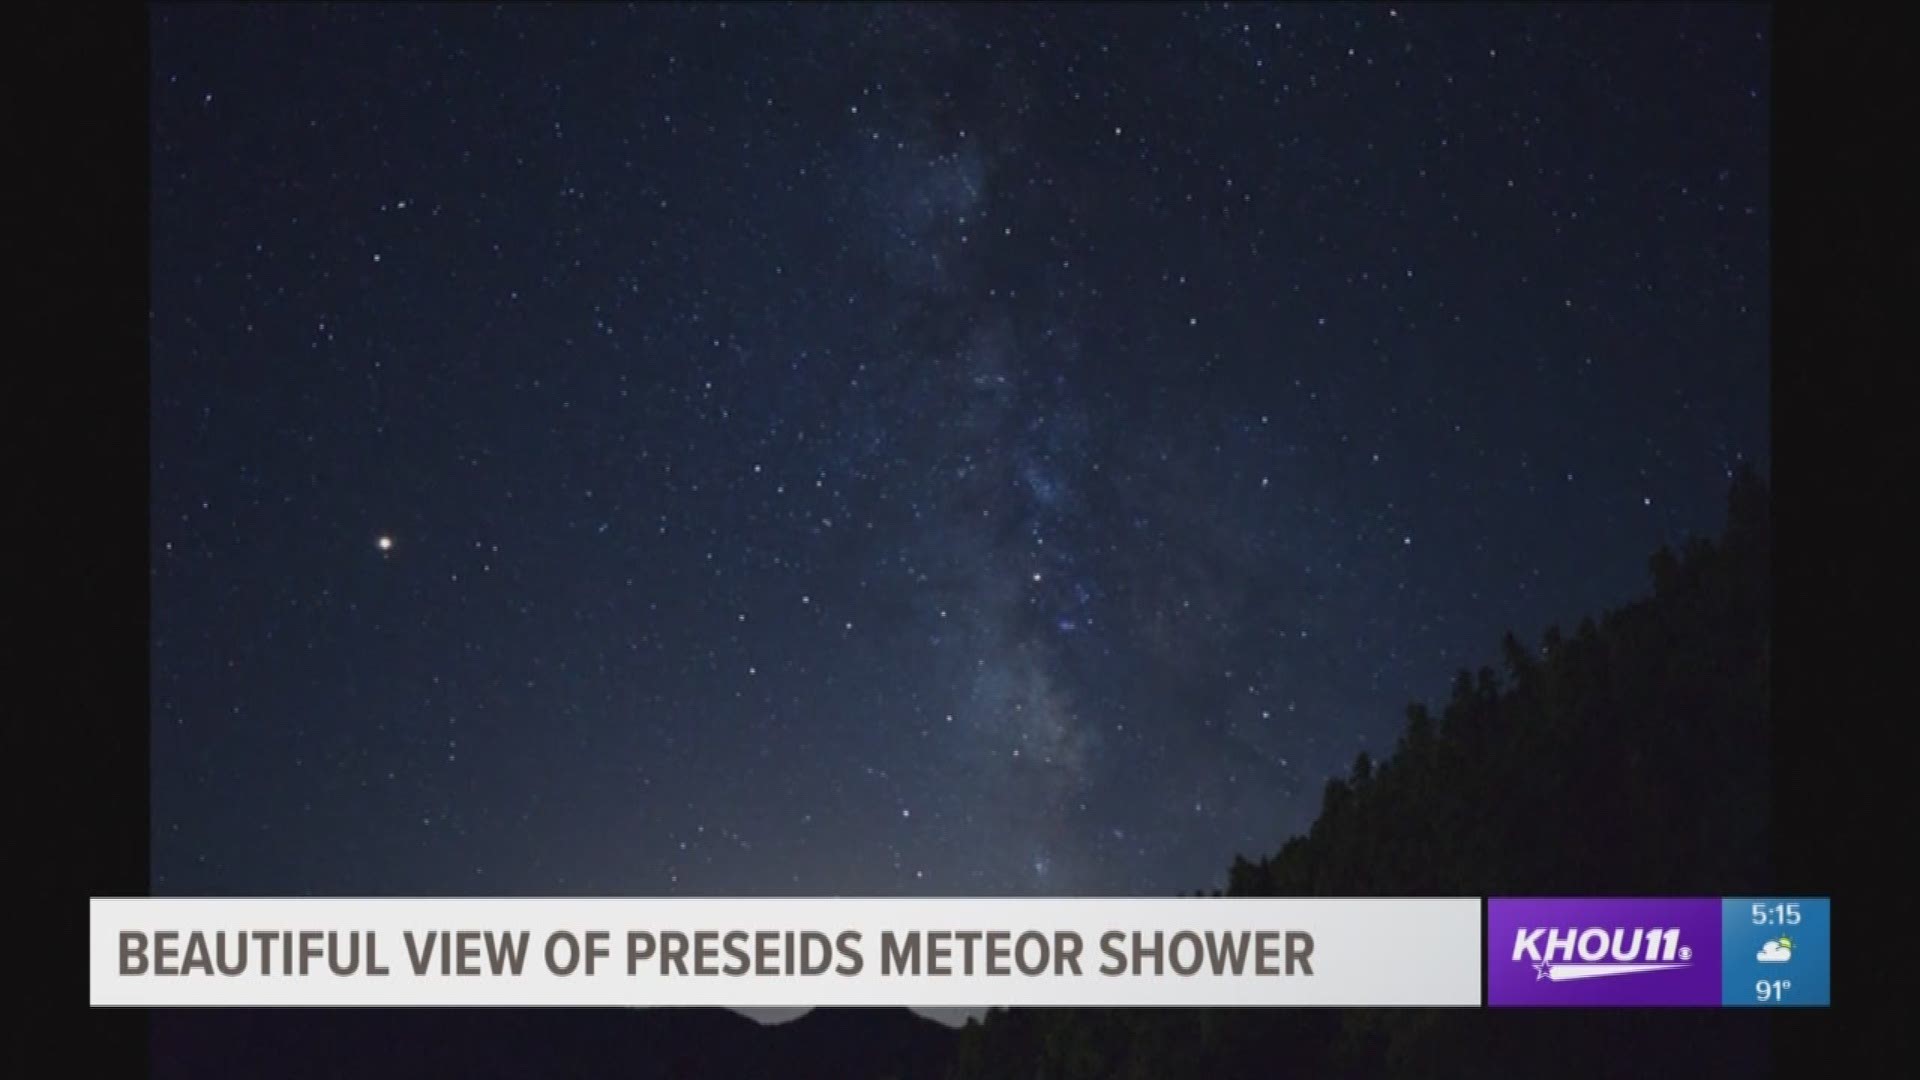 The Perseid meteor shower, a phenomenon producing up to 60 to 70 meteors per hour in the night's sky, peaked over the weekend.